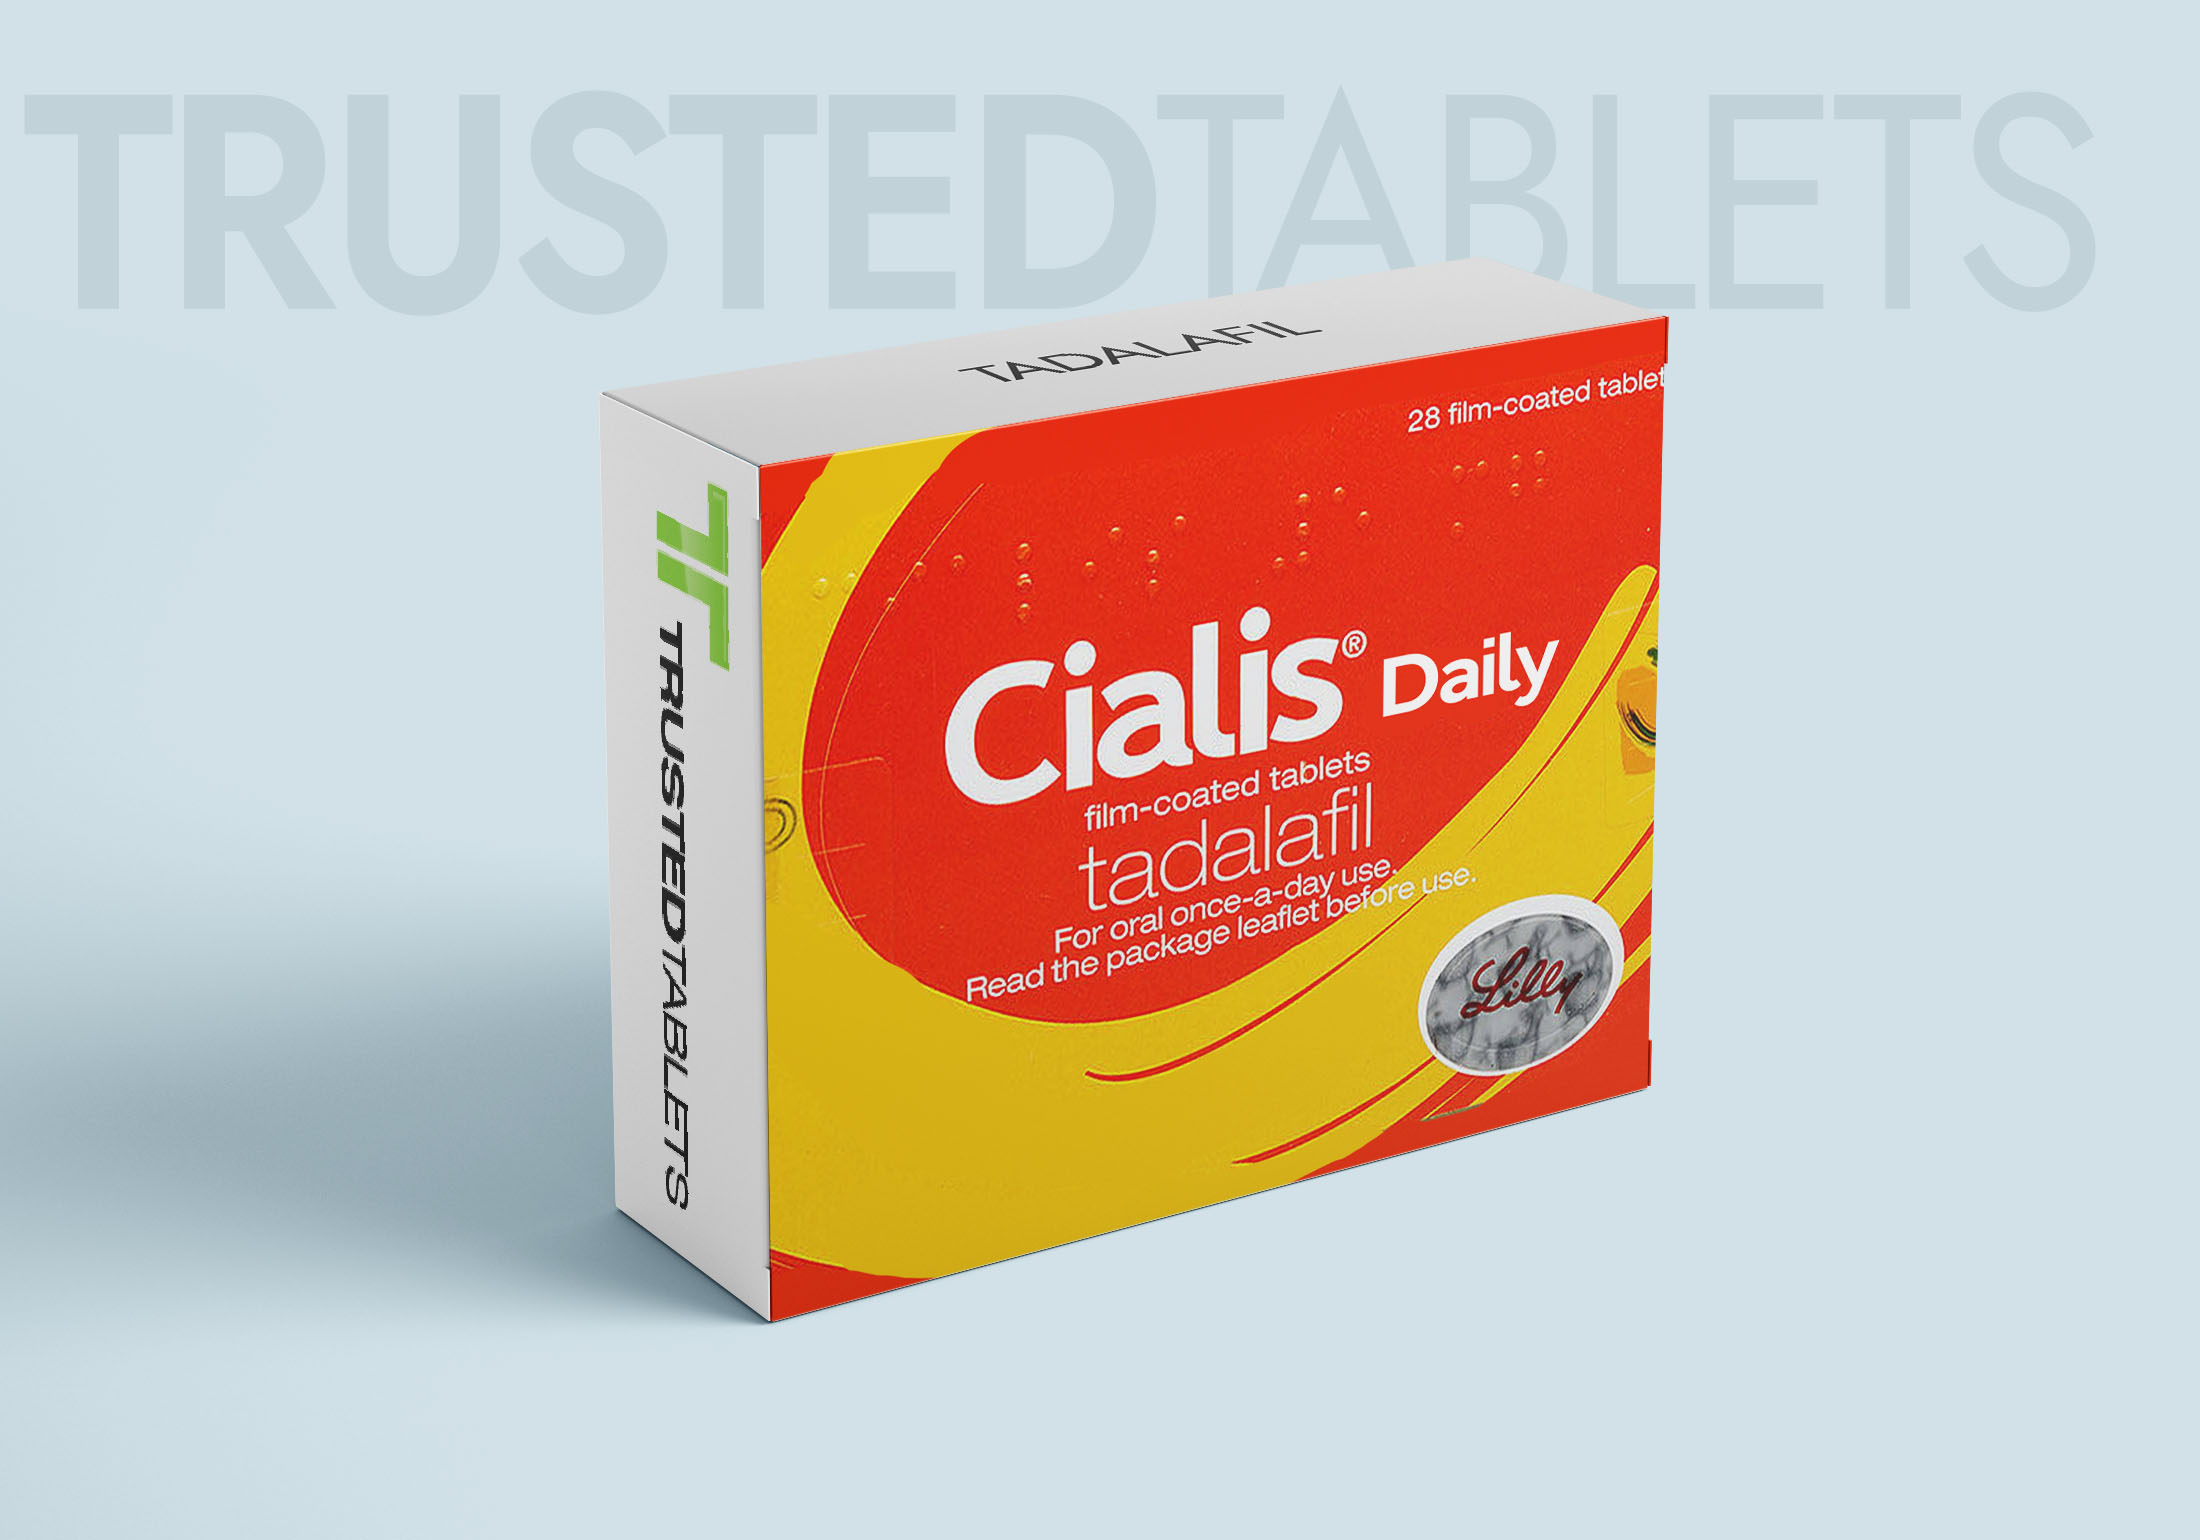 Cialis Daily TrustedTablets